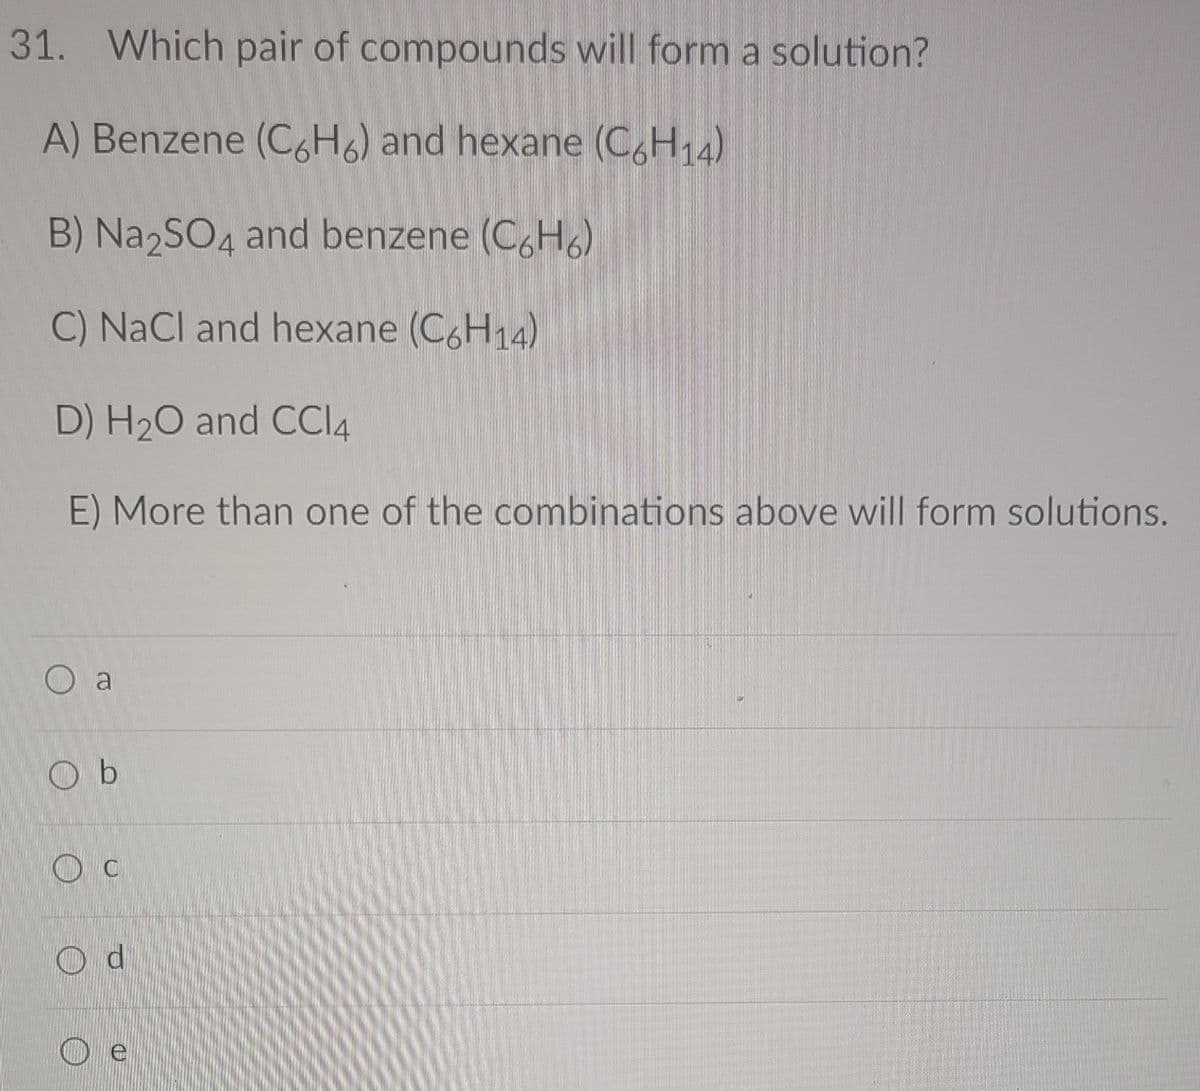 31. Which pair of compounds will form a solution?
A) Benzene (C6H6) and hexane (C,H,4)
B) Na2SO4
and benzene (C,H6)
C) NaCl and hexane (C6H14)
D) H20 and CCI4
E) More than one of the combinations above will form solutions.
O a
O b
O c
